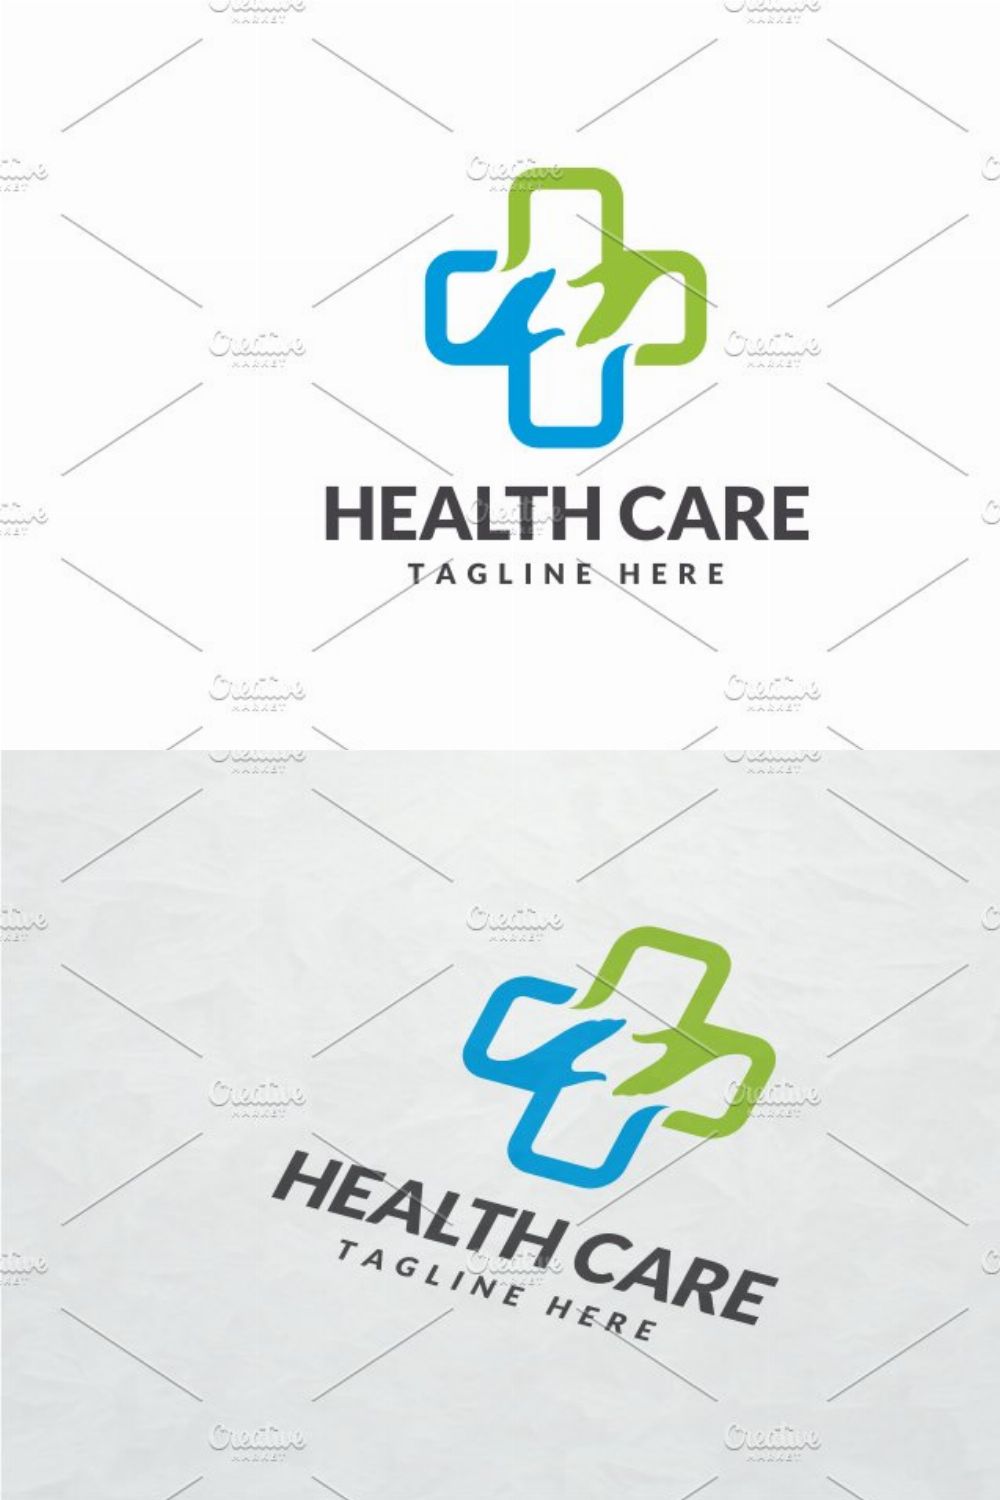 Health Care pinterest preview image.